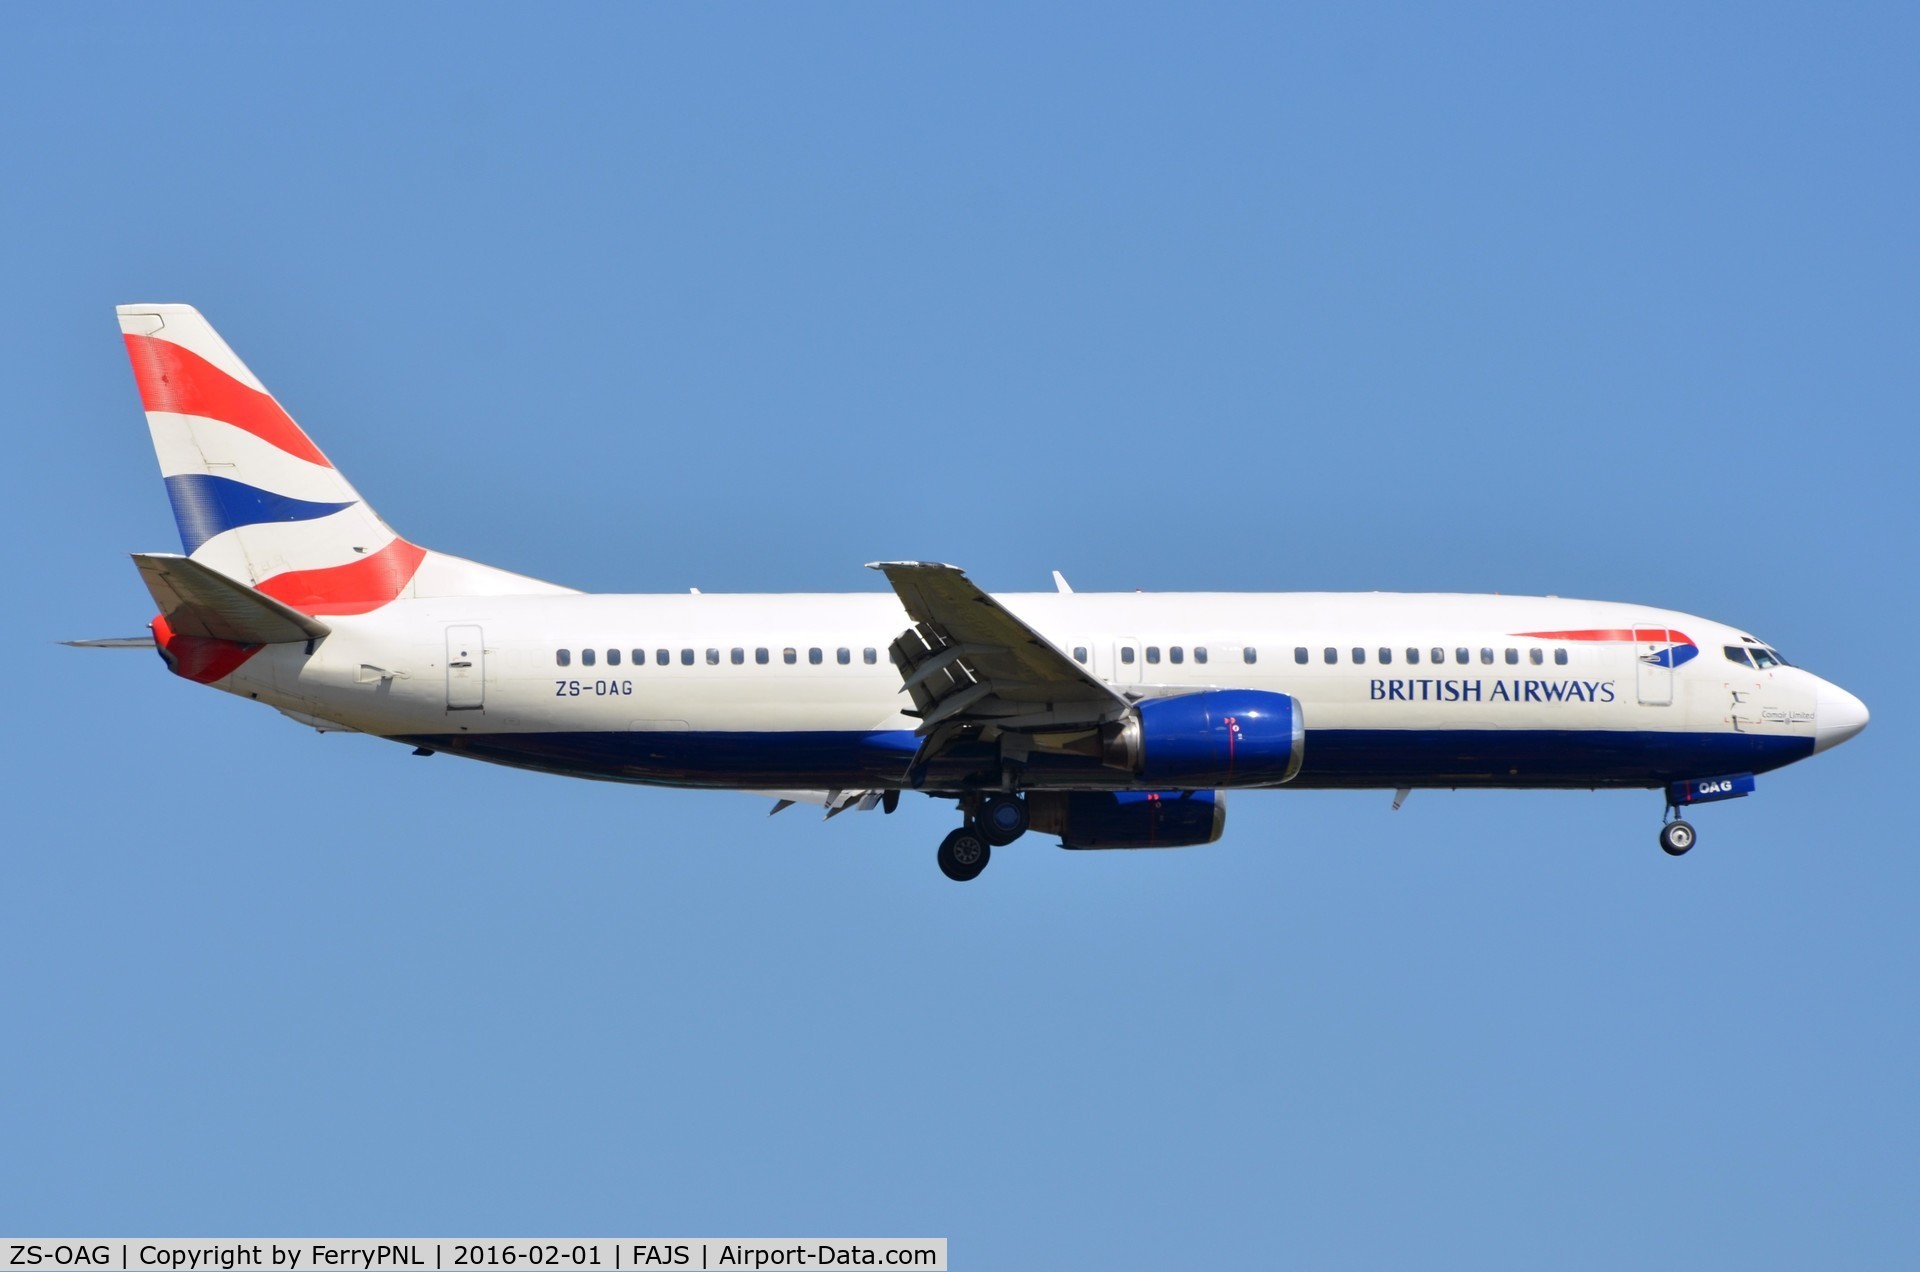 ZS-OAG, 1993 Boeing 737-4H6 C/N 27168, Classic B734 in BA c/s operated by Comair.